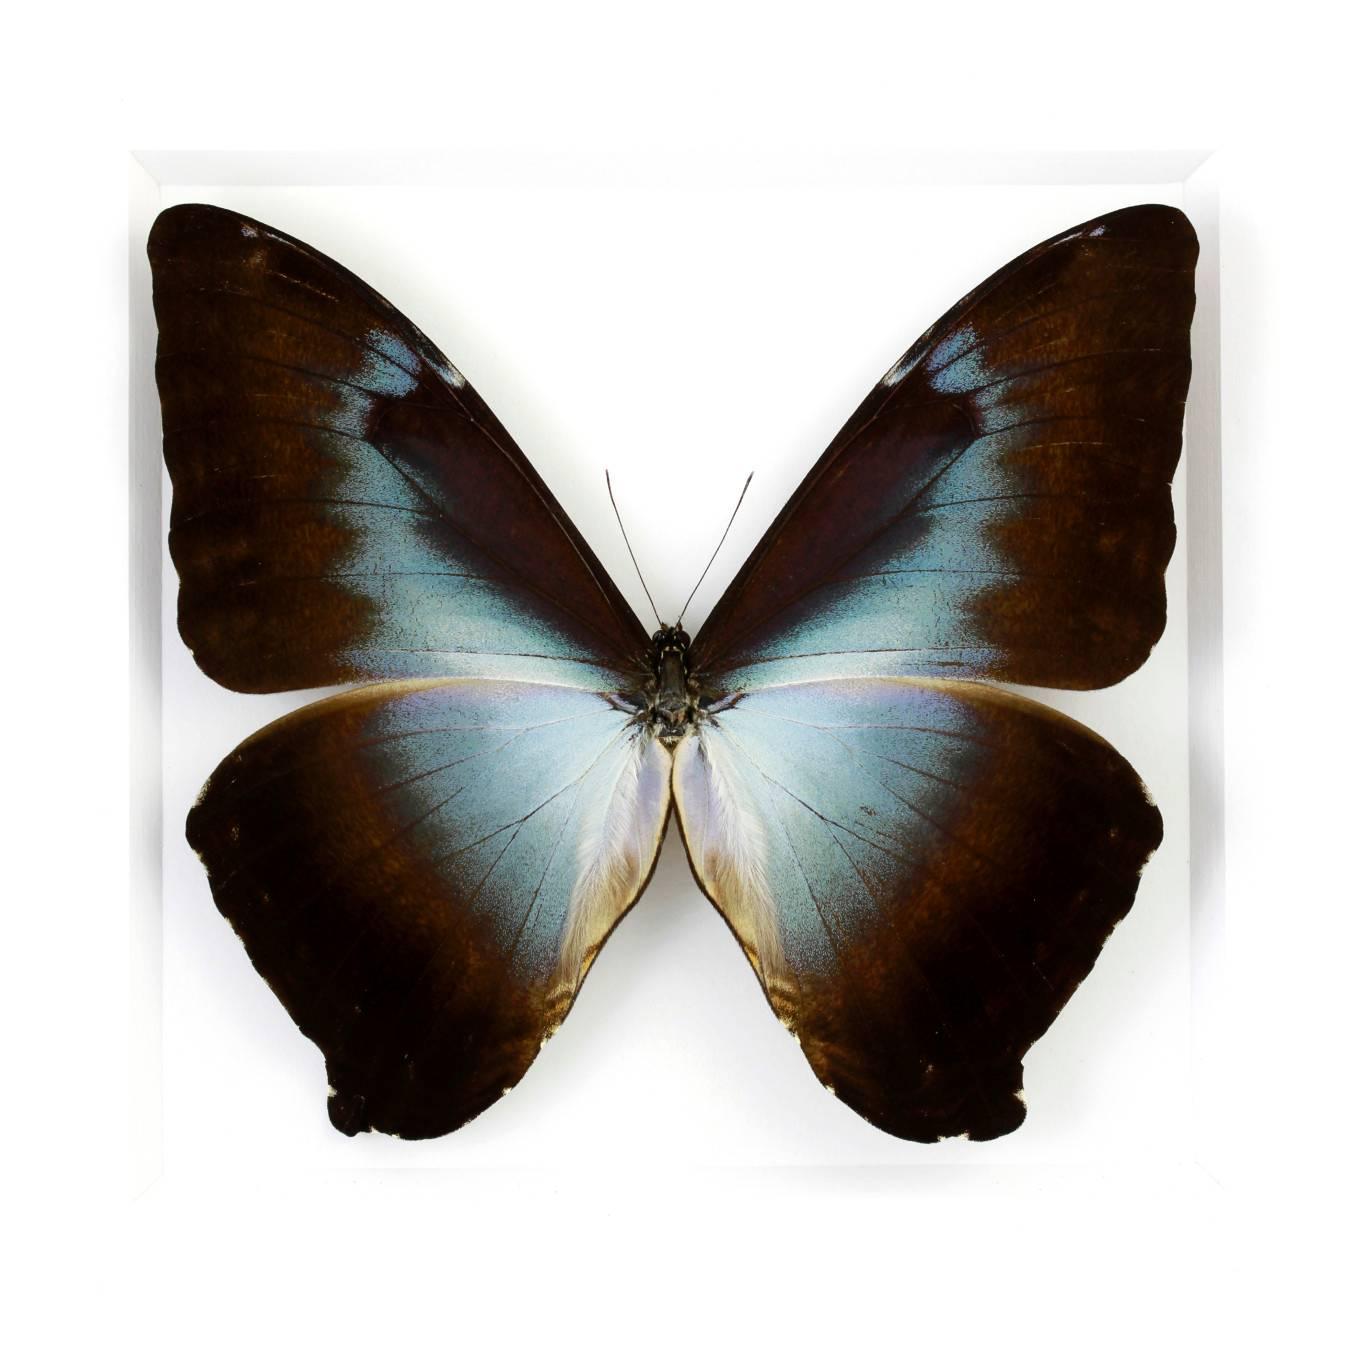 Blue Morpho phanodemus butterfly framed by Christopher Marley.

Note from the artist: 